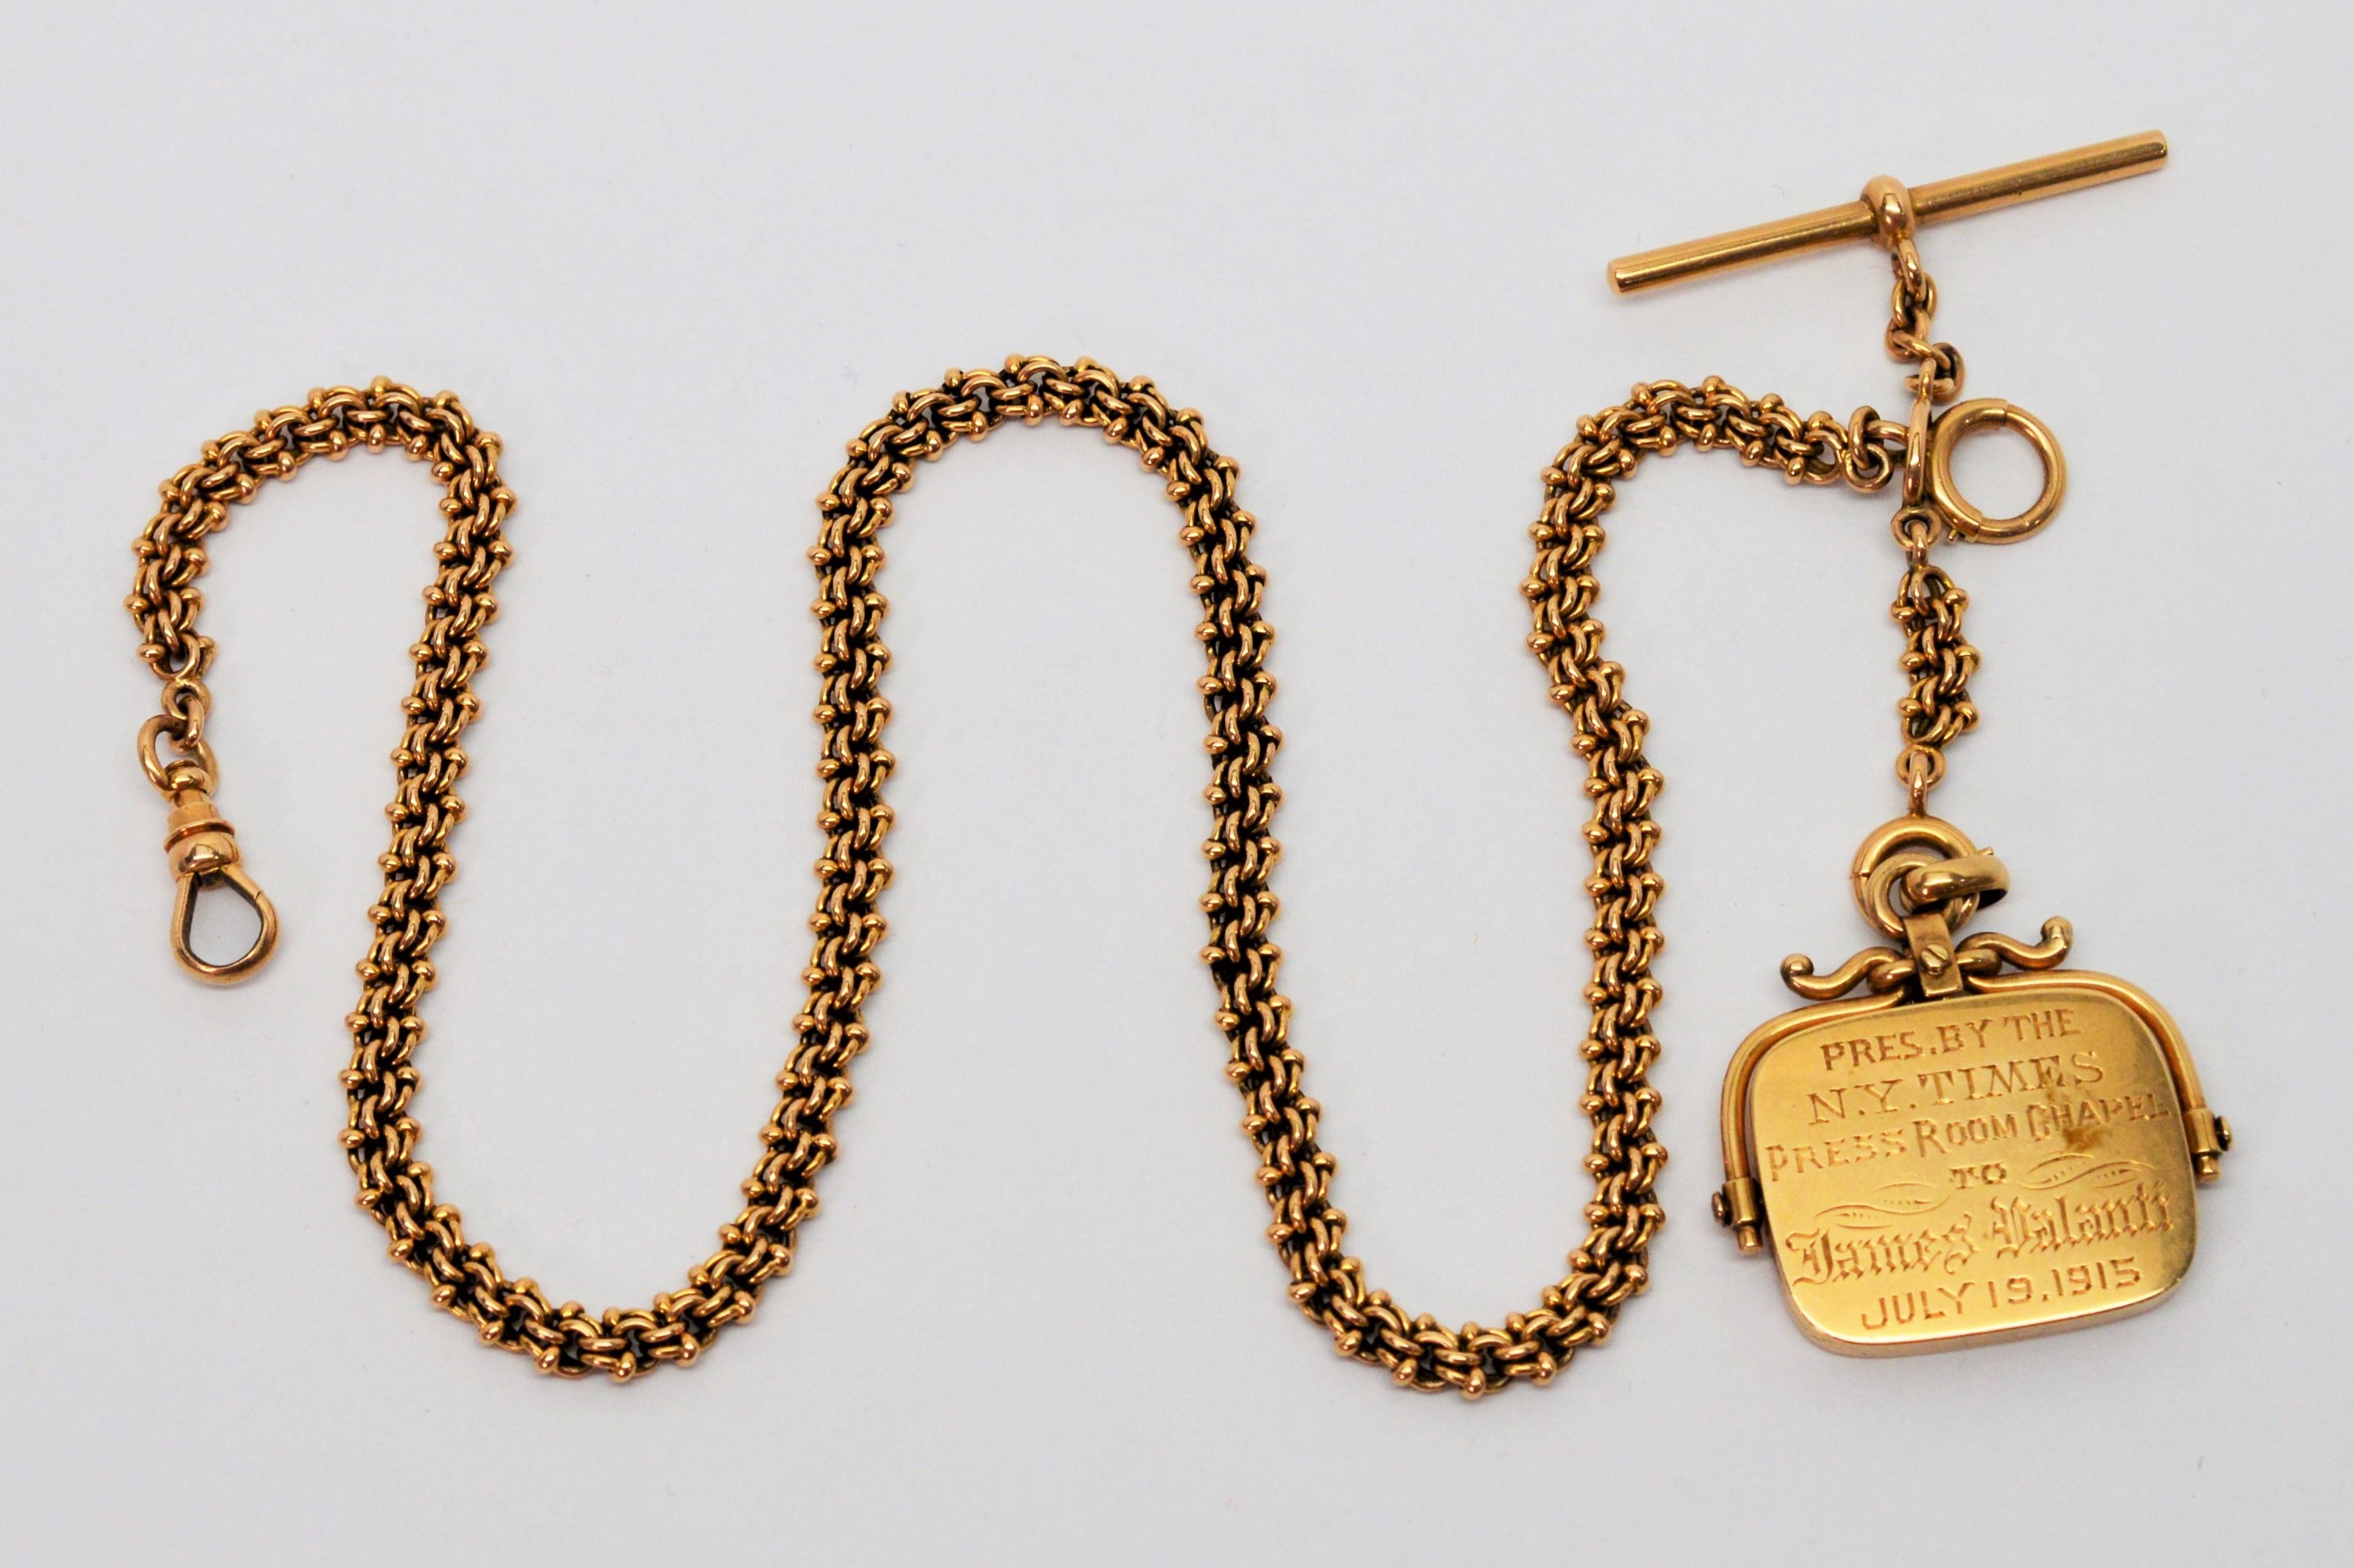 Elegantly handmade fourteen carat (14K) yellow gold sixteen inch watch chain with T- bar and unique fob with 1 x 1/4 inch picture case personalize locket inscribed and dated 